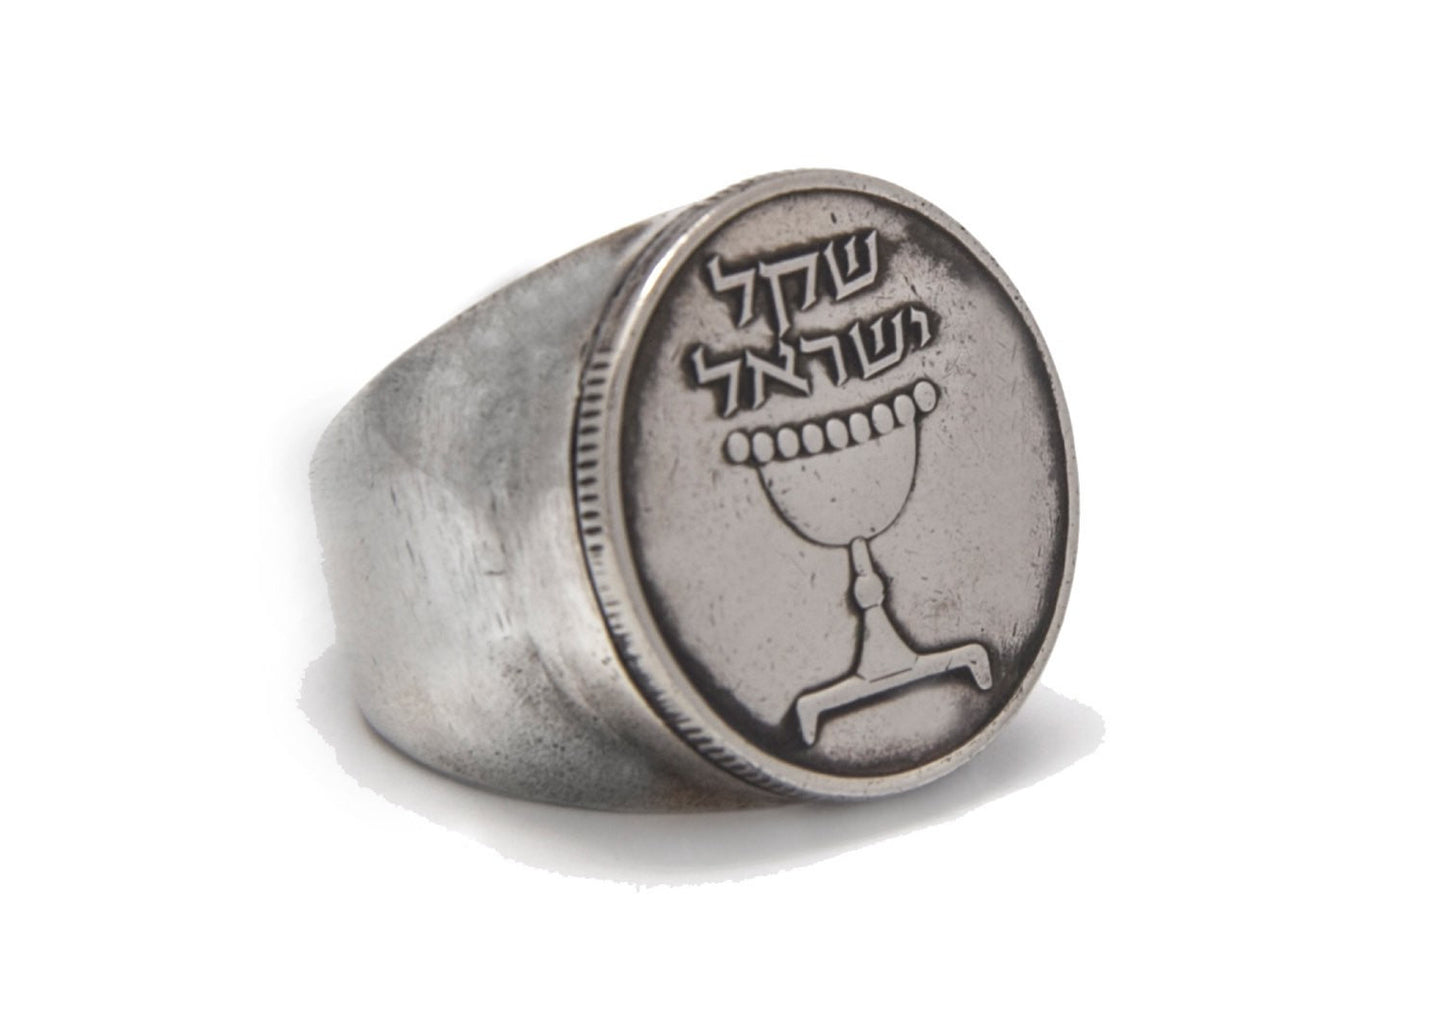 Israeli Old, collector's Coin Ring - 1 Sheqel Coin of Israel